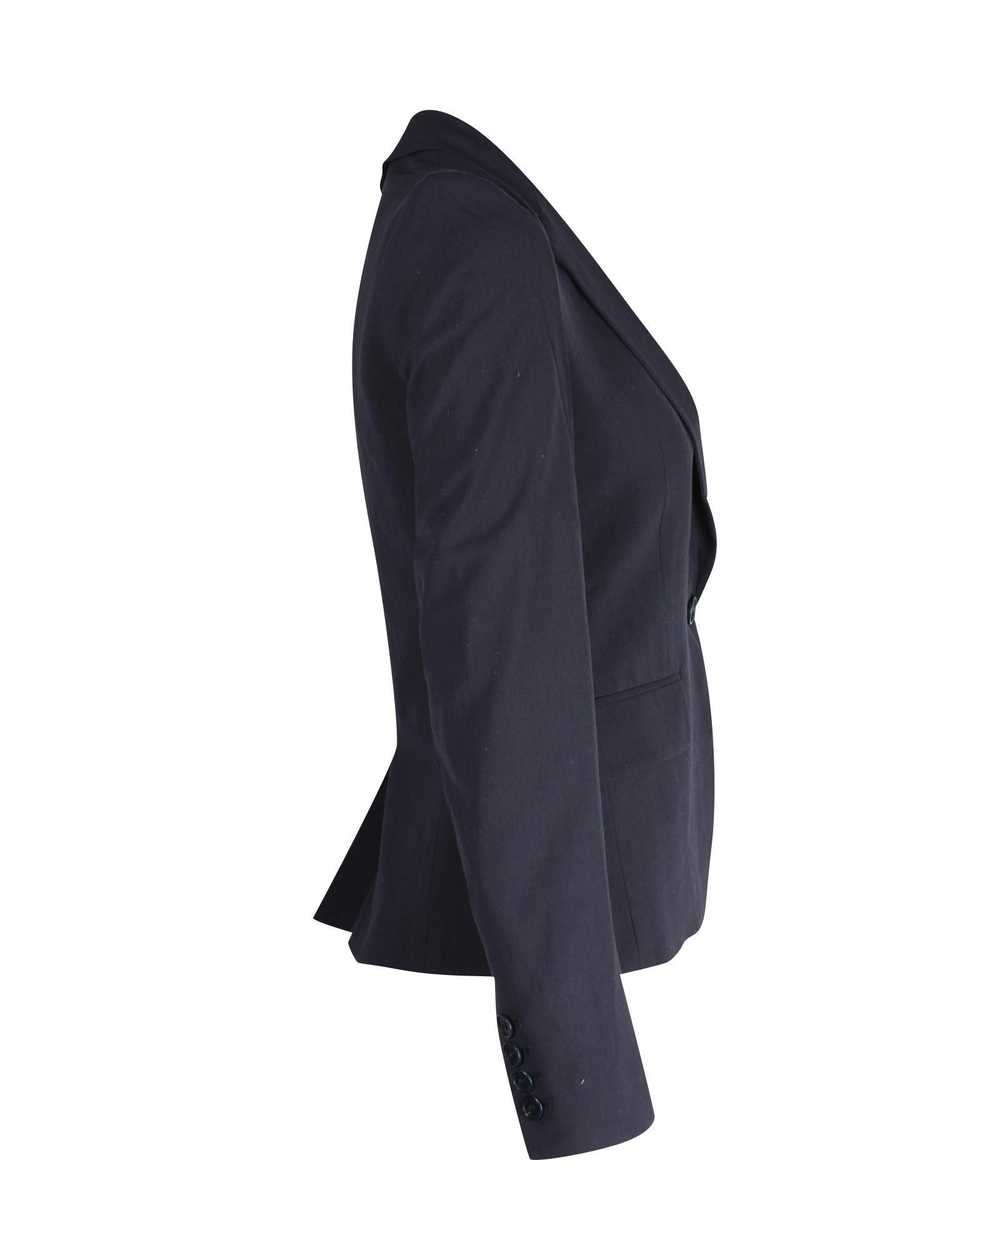 Theory Navy Blue Wool Single-Breasted Blazer - image 4